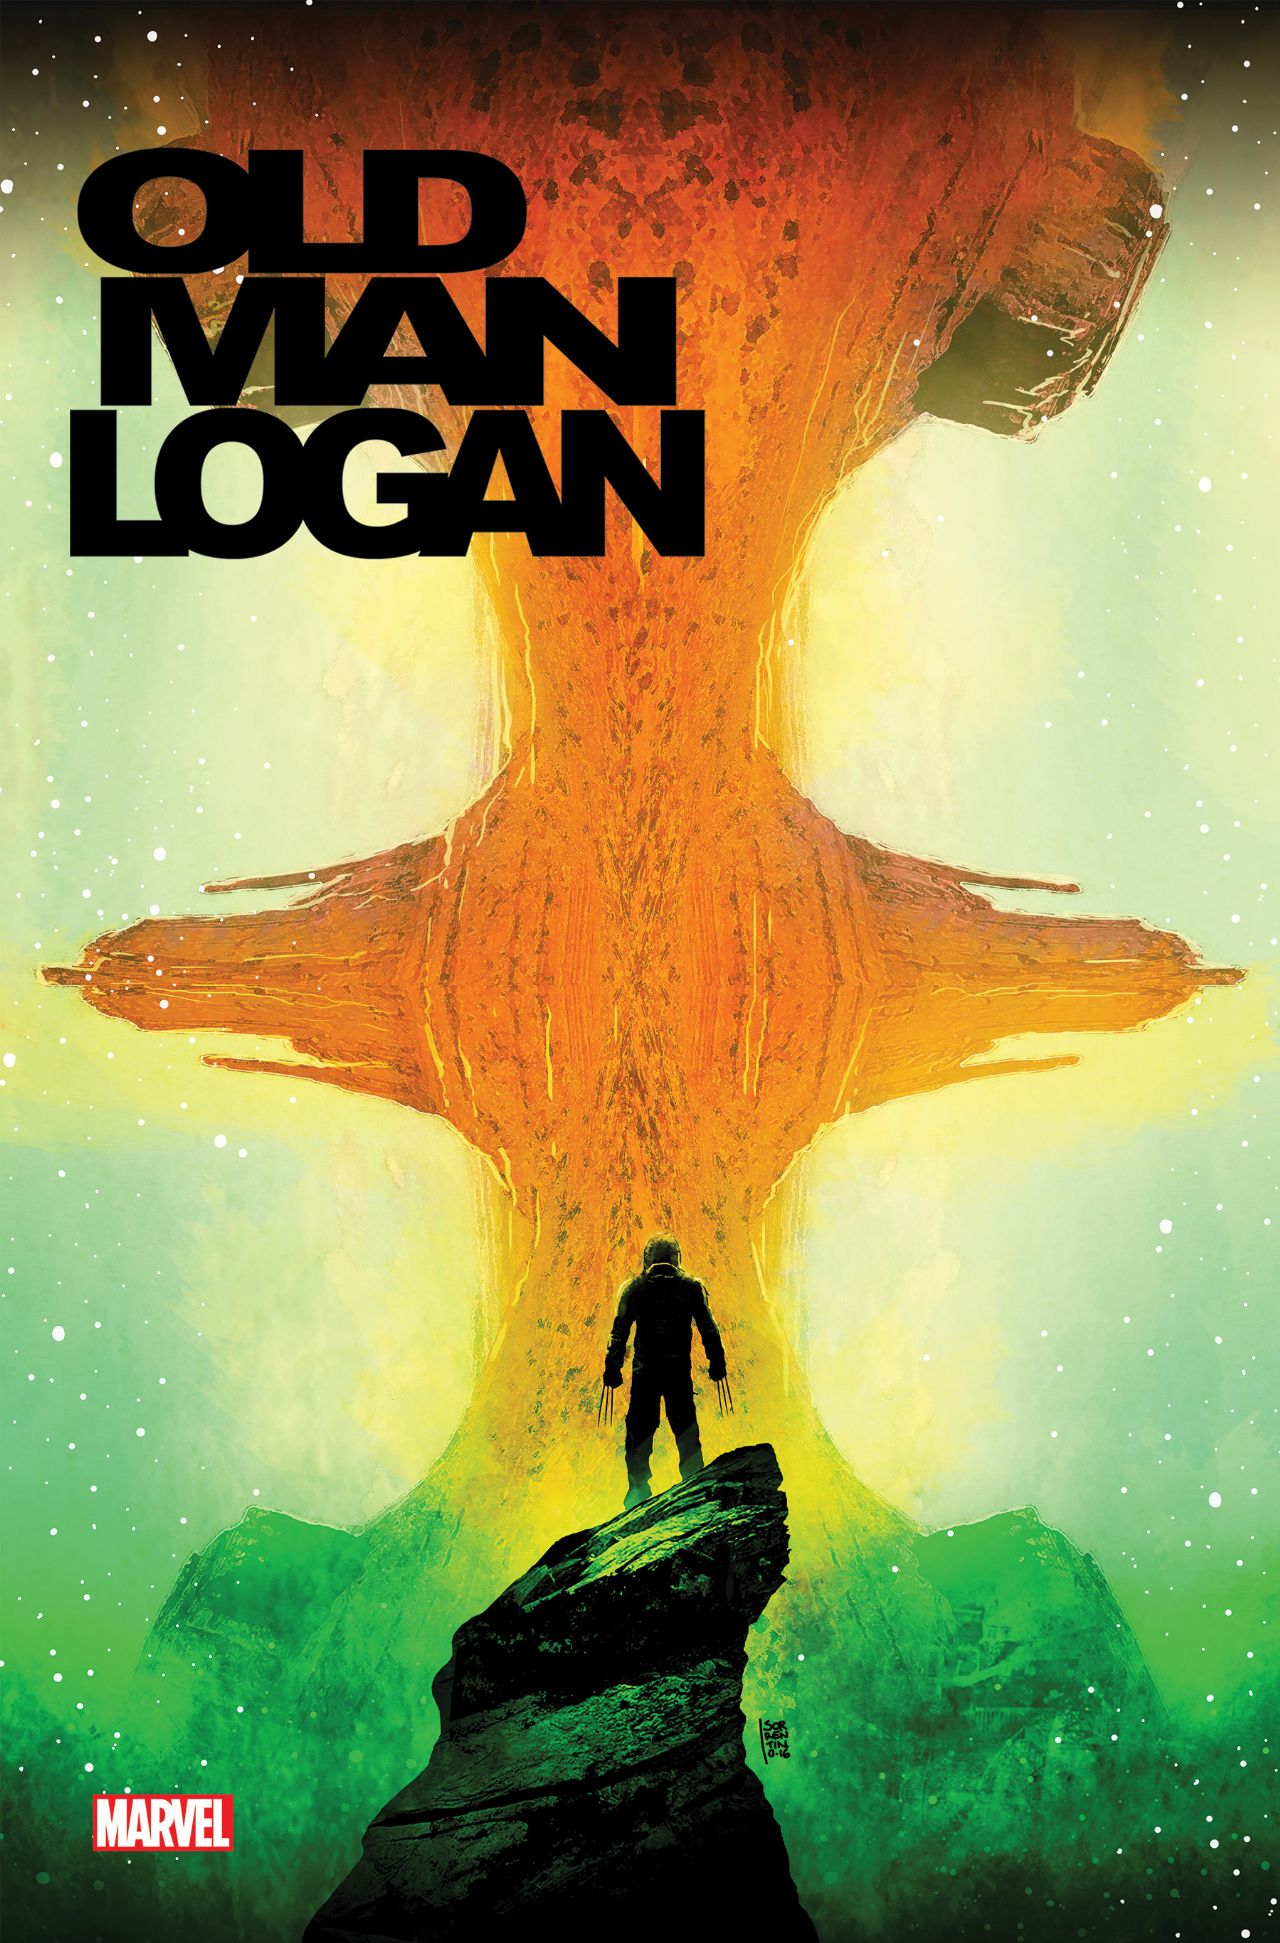 Vampires And Monsters And Brood, Oh My! Old Man Logan Vol. 4: Old Monsters Review